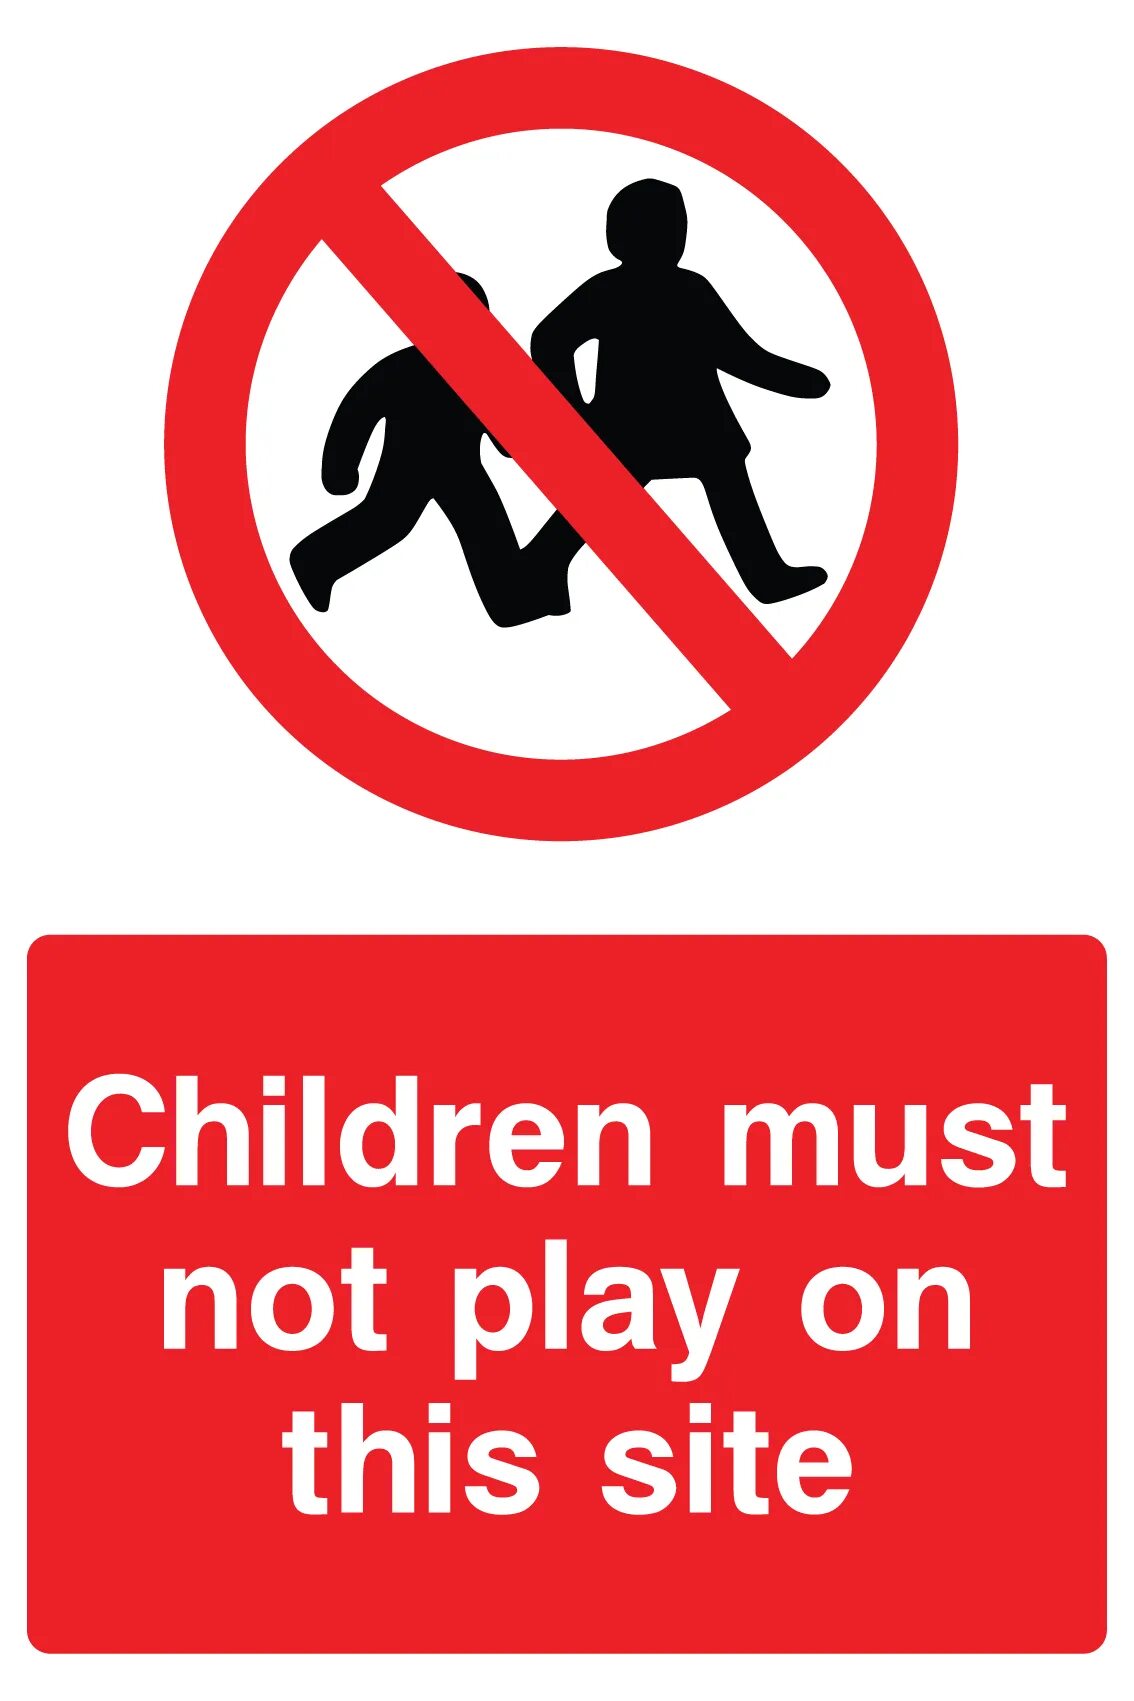 Children must not Play on this site. Must not. Must must not. Must nopt. Do this site